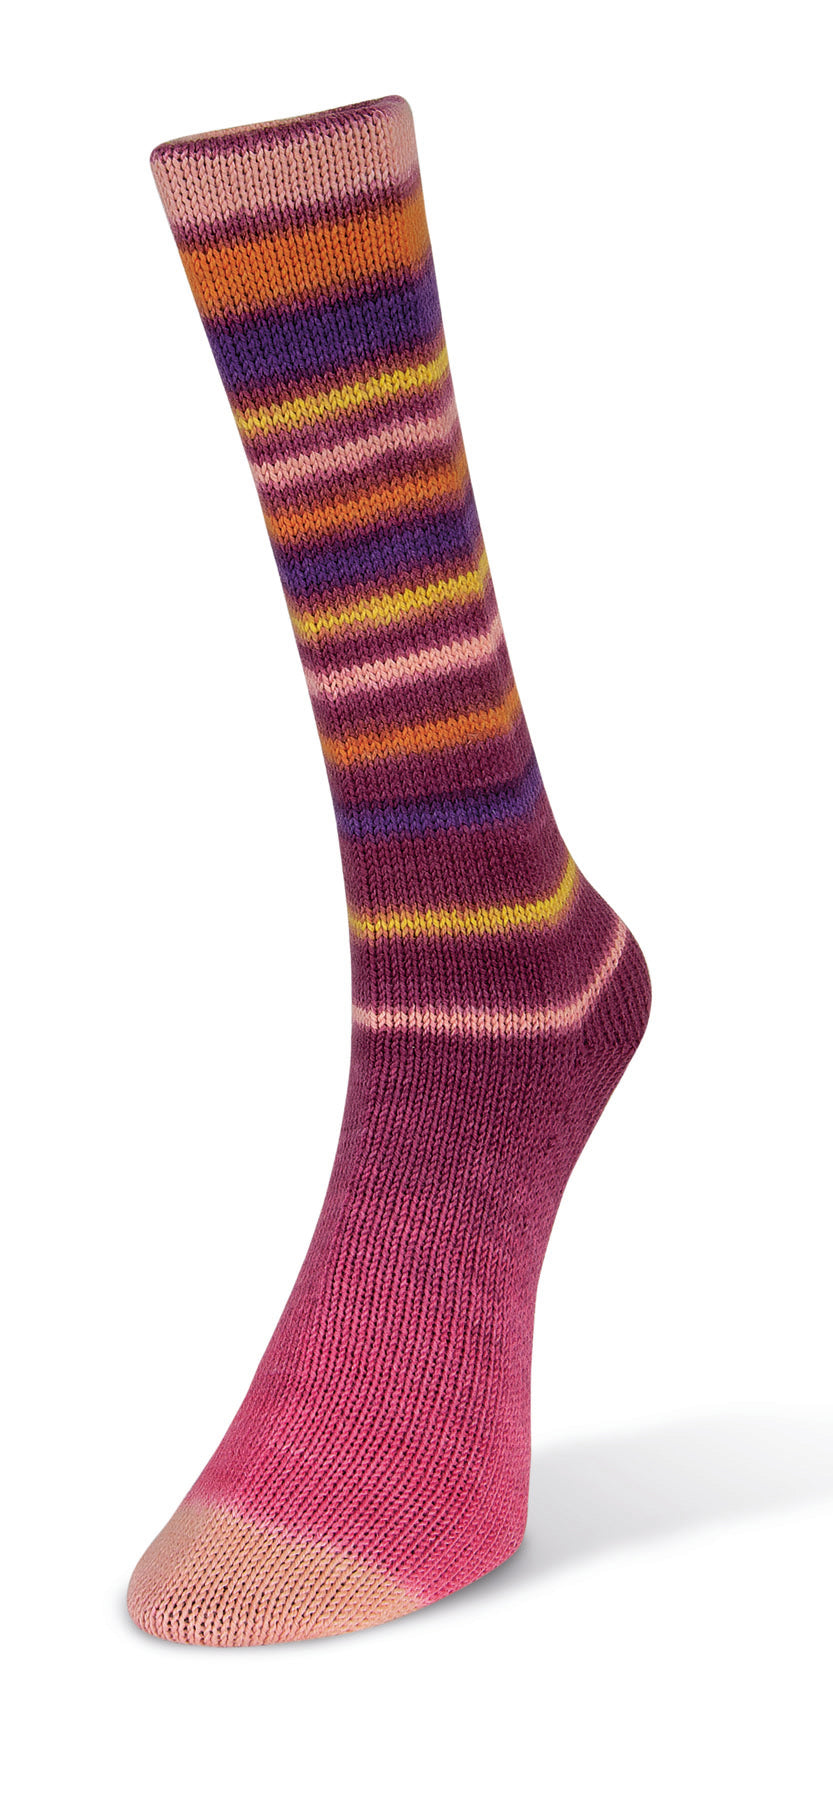 Laines de Nord Inifinity Sock color pink purple yellow